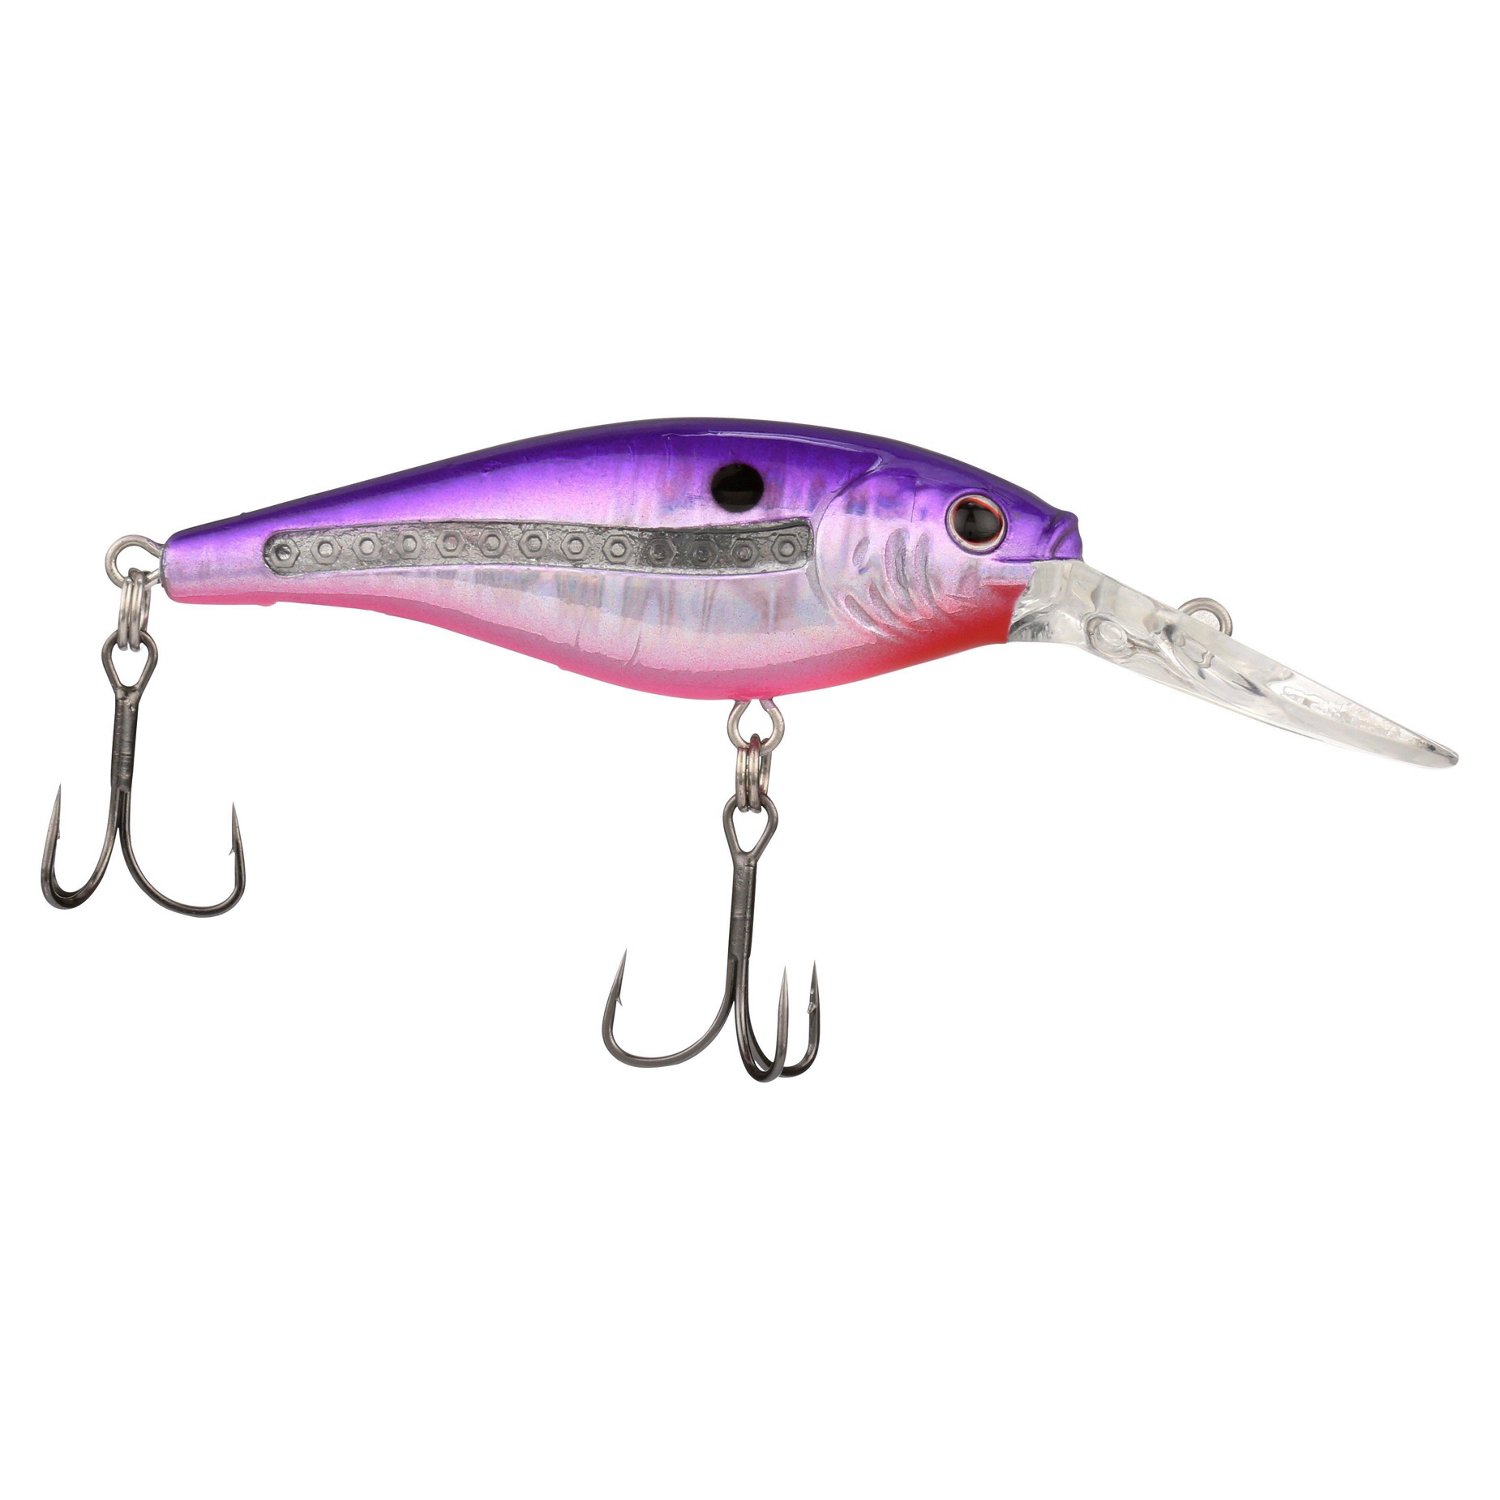 https://academy.scene7.com/is/image/academy//baits---lures/berkley-scented-flicker-shad-baitfish-lures-5-pack-fsfsh7vpbf-asst-multi/31ebb4534eeb4770aed7ef6f88be4656